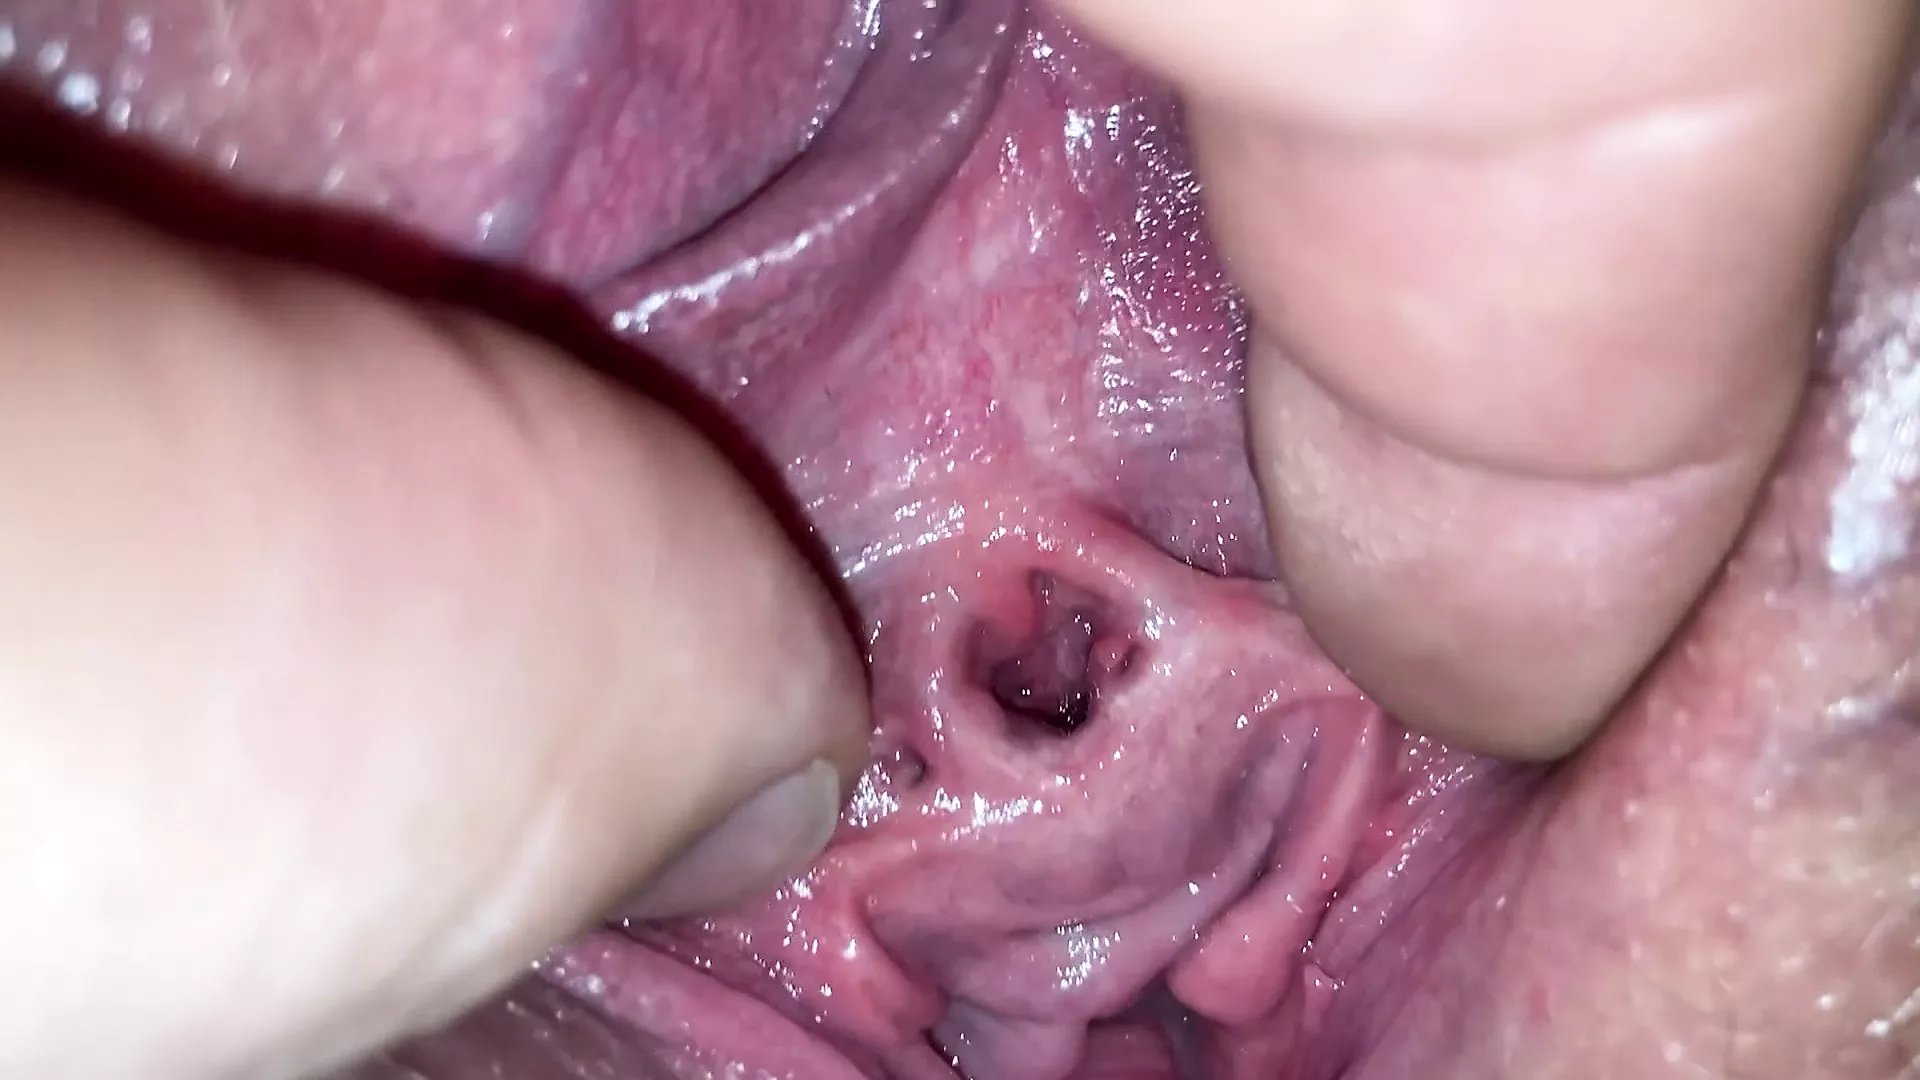 Exposed close up pov BBW open peehole fingering. BBW ass worship. Borr and Sirens Delight image picture